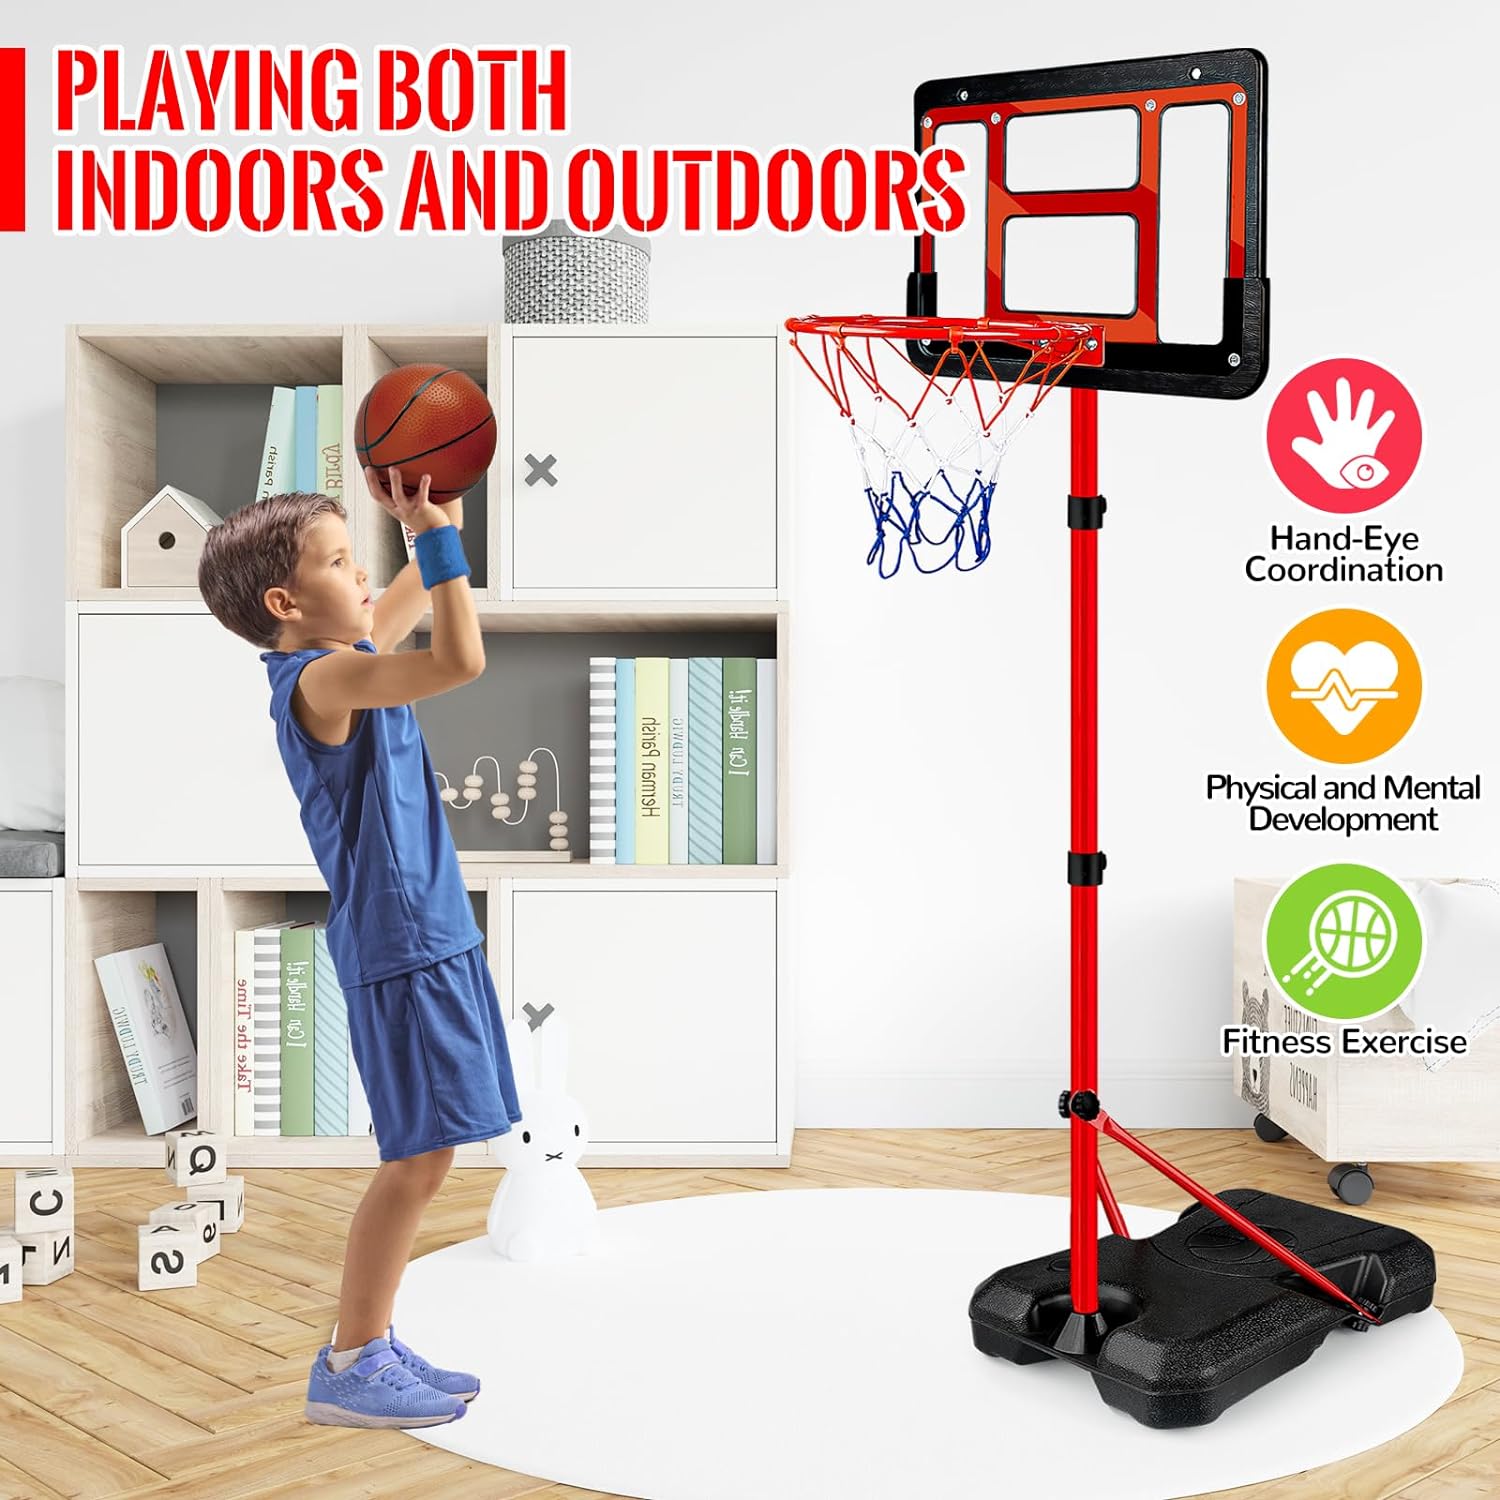 Kids Basketball Hoop with Stand, Adjustable Basketball Set Height 3.5ft-6.2ft, Toddler Basketball Toys for Boys Age 3 4 5 6 7 8, Mini Portable Basketball Goals for Indoor Outdoor Backyard Sport Game